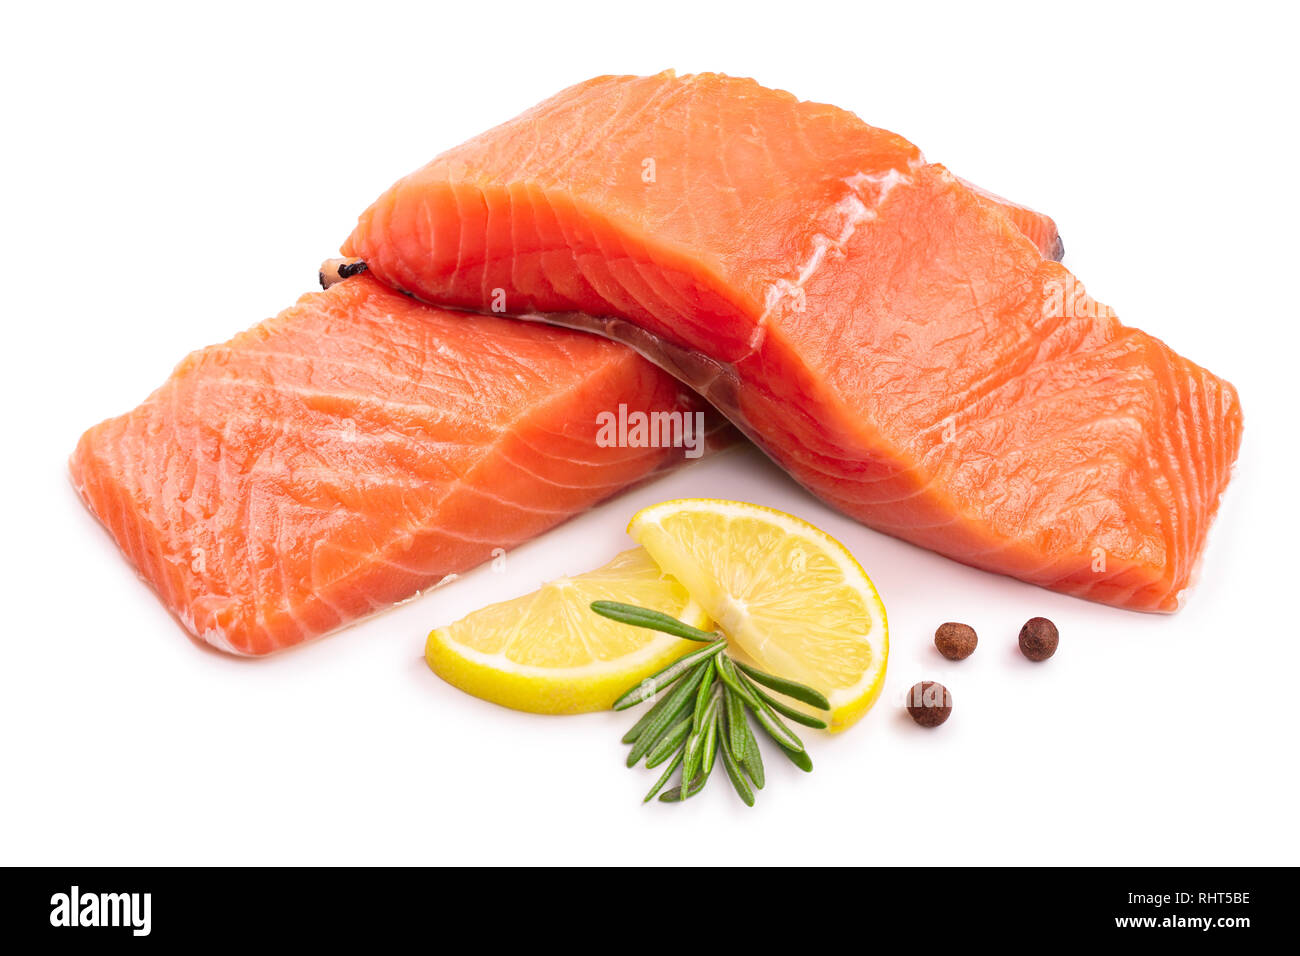 https://c8.alamy.com/comp/RHT5BE/fillet-of-red-fish-salmon-with-lemon-and-rosemary-isolated-on-white-background-RHT5BE.jpg